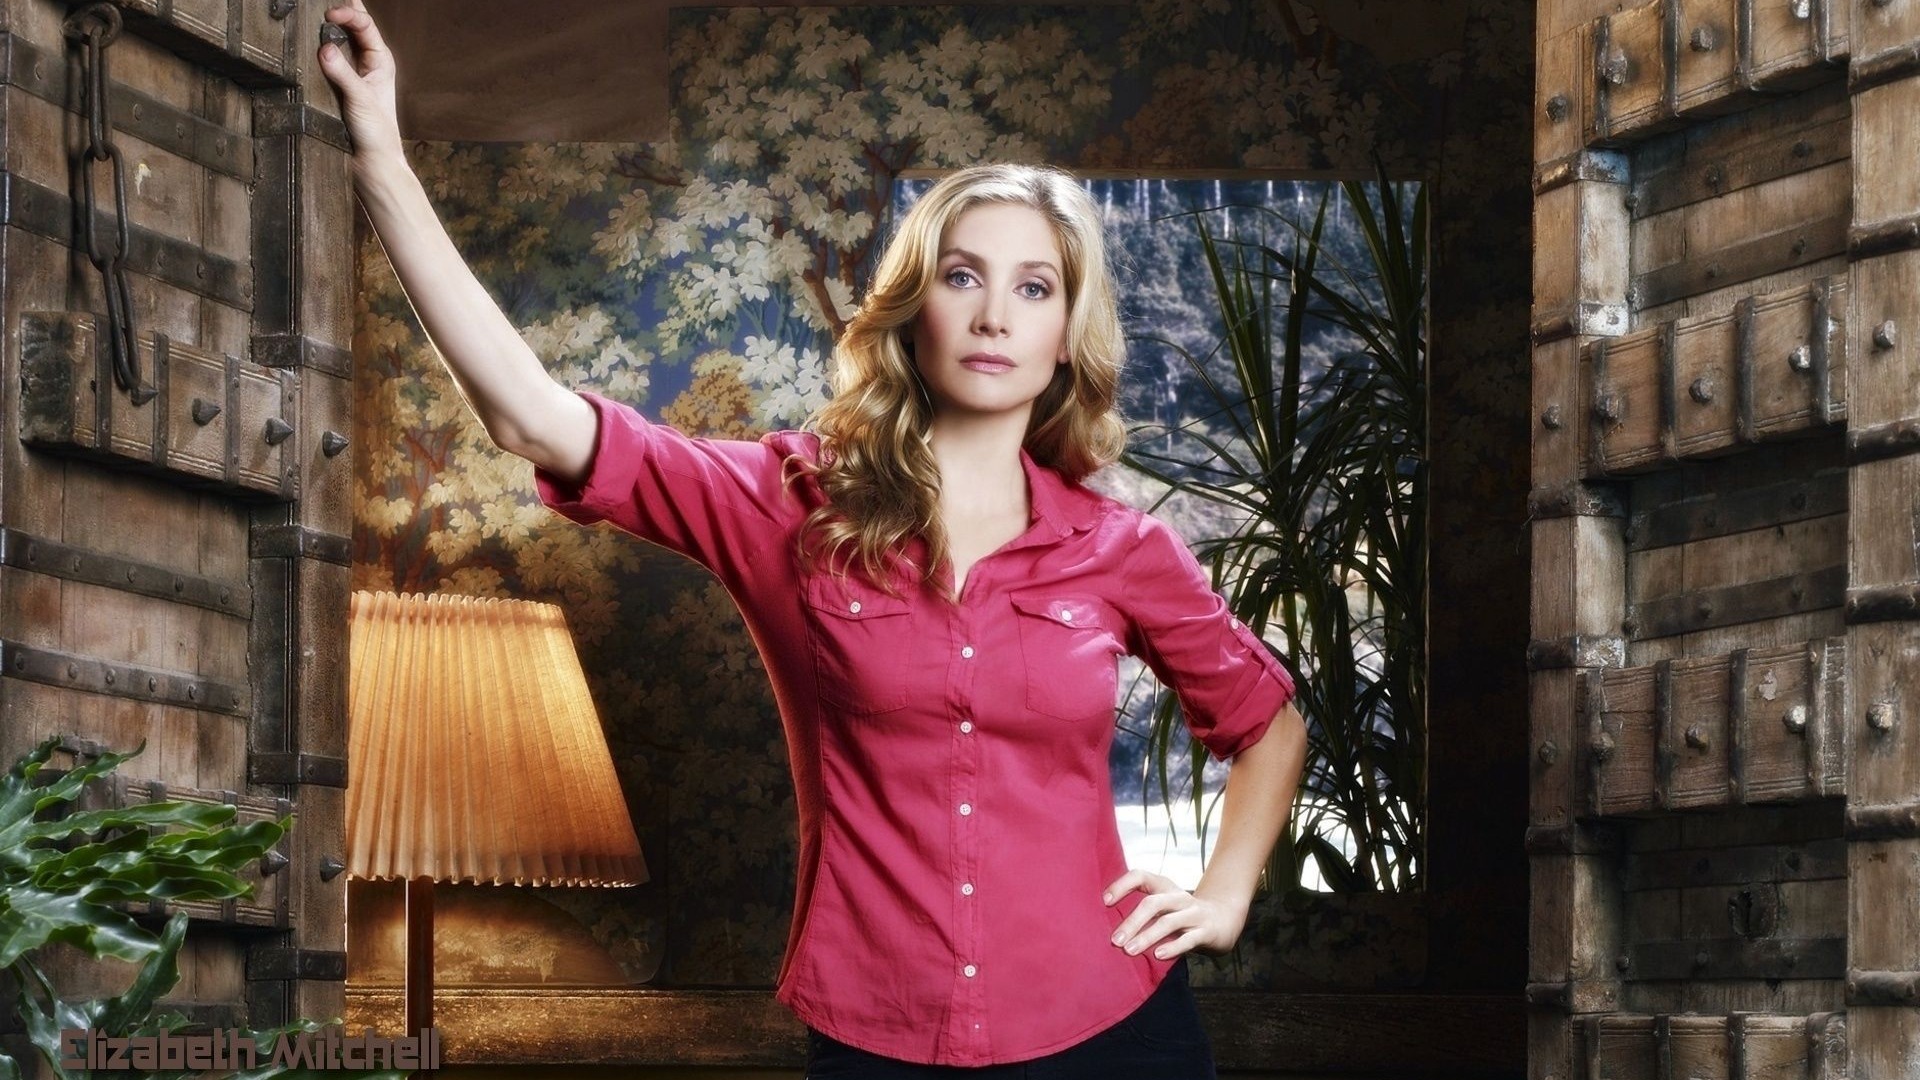 Elizabeth Mitchell #006 - 1920x1080 Wallpapers Pictures Photos Images